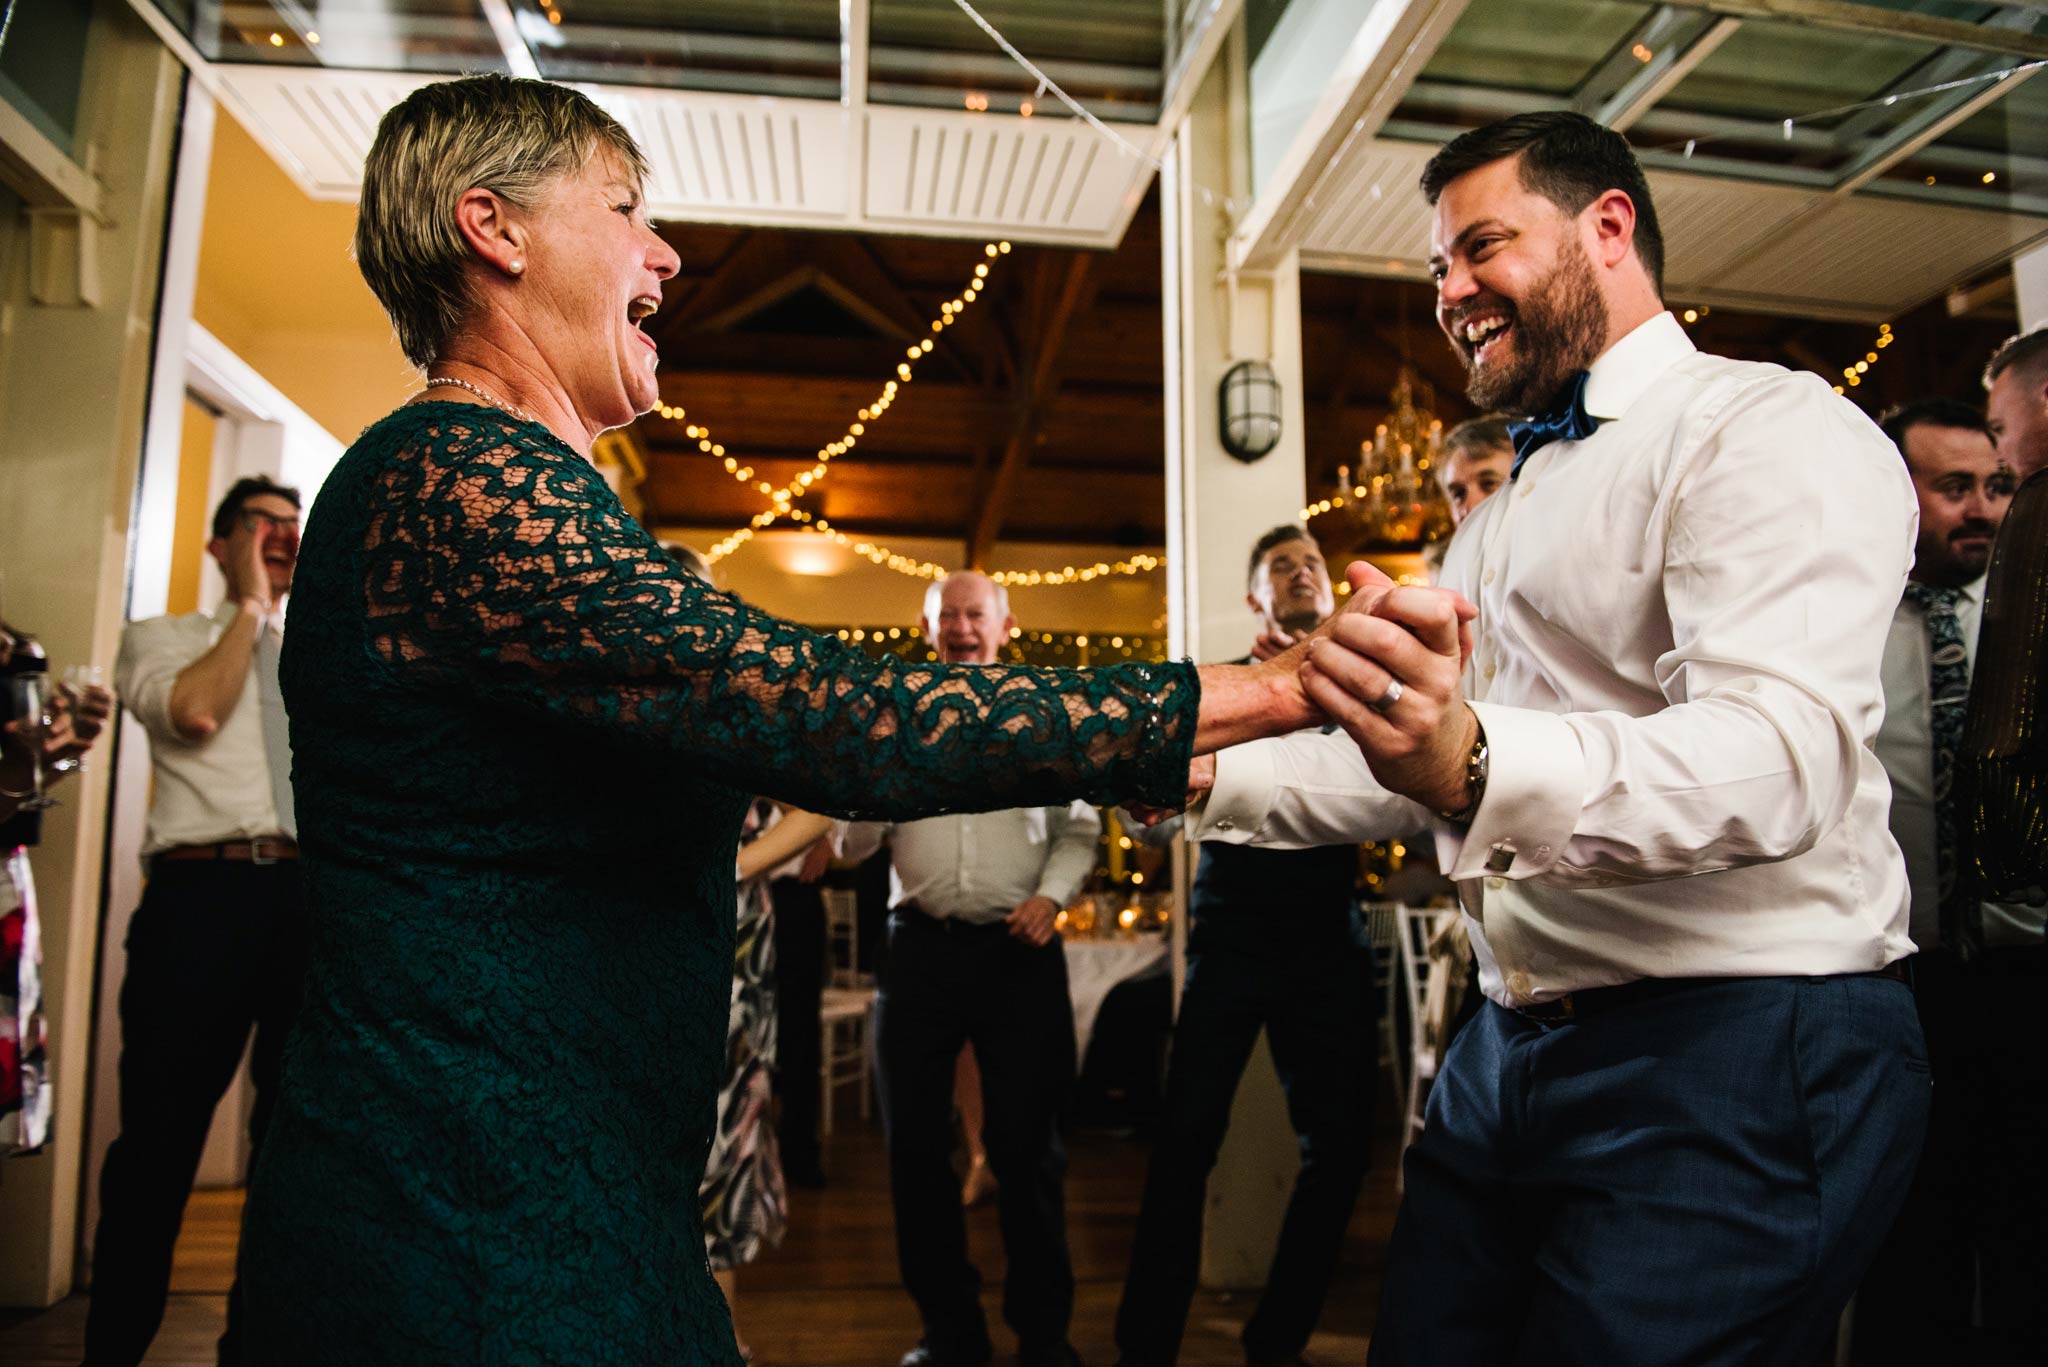 Mother and groom dancing together with guests watching in the background